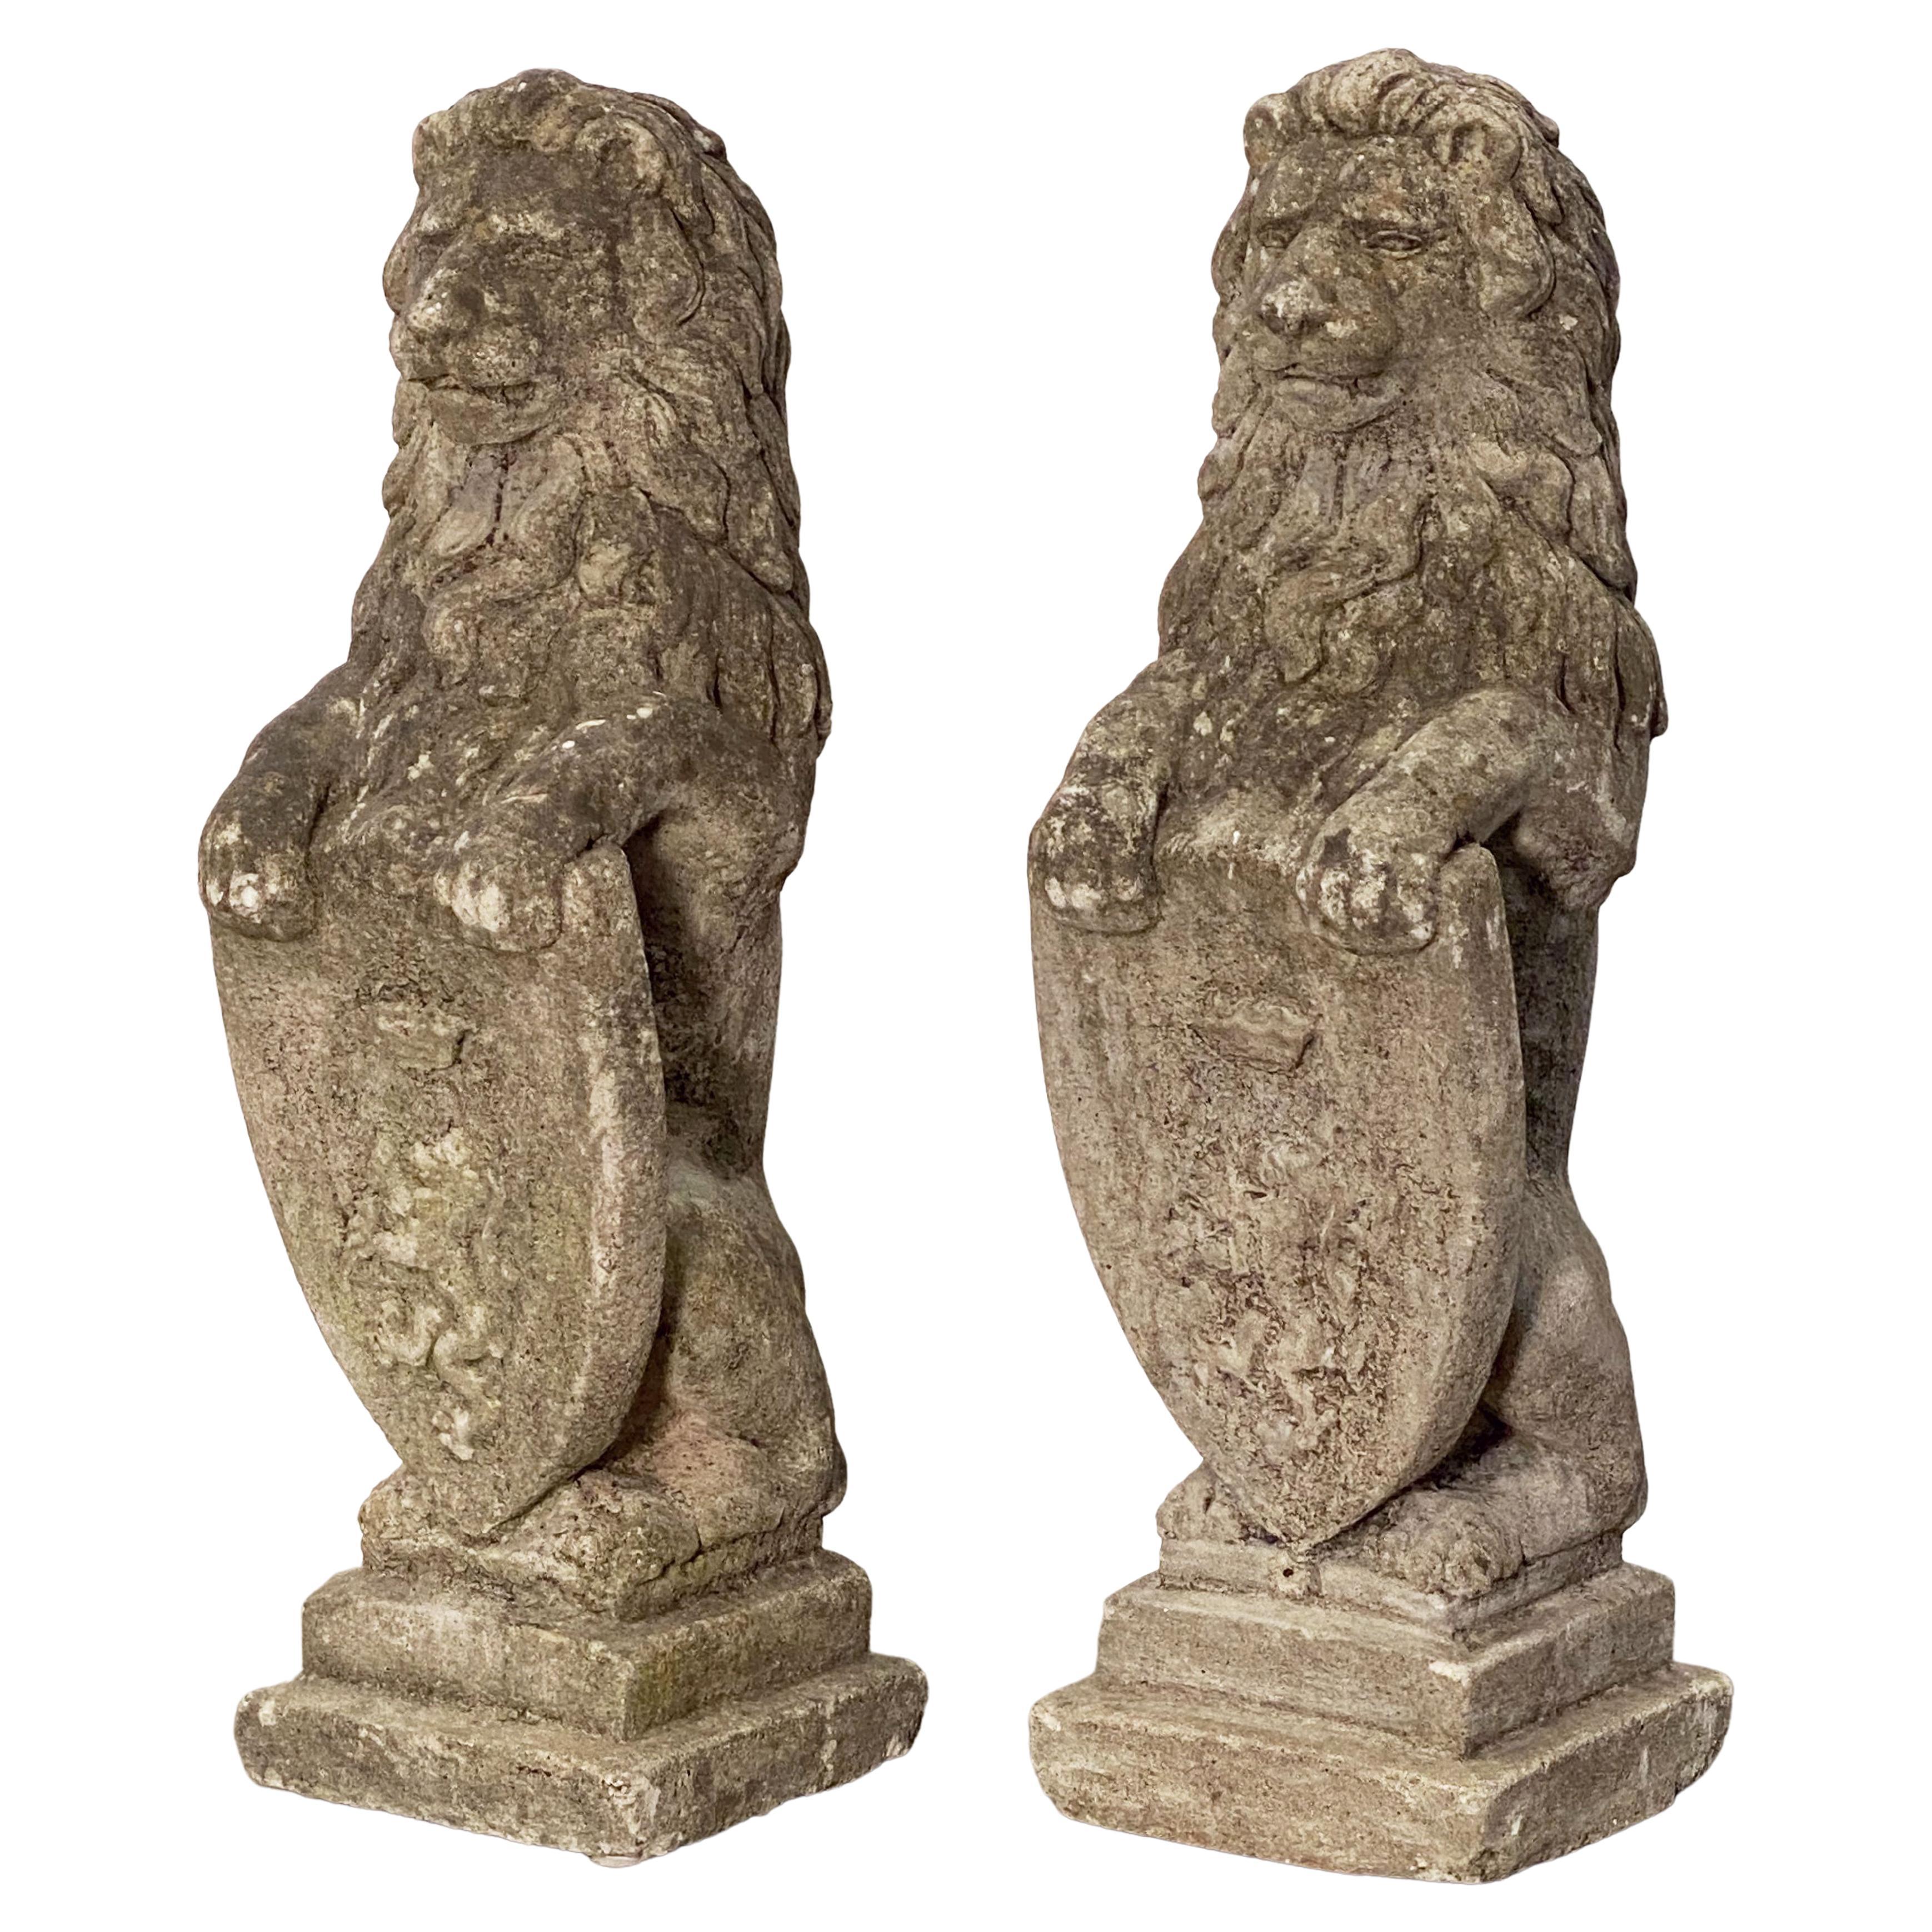 Pair of English Garden Stone Standing Lion Statues with Heraldic Shields 